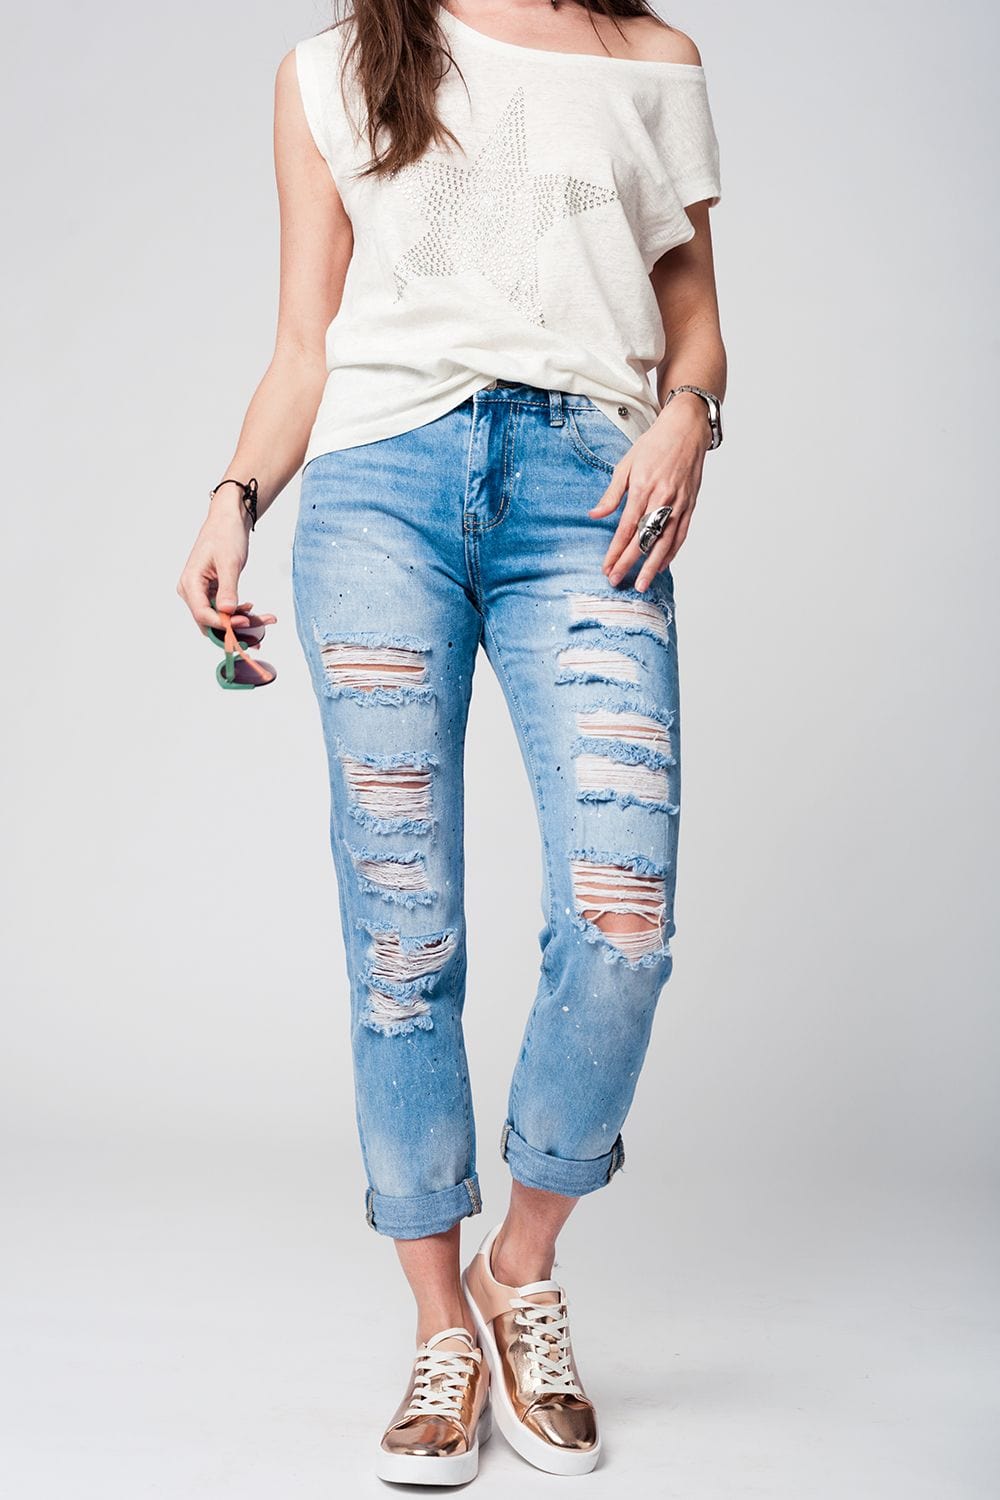 Q2 Women's Jean Mom jeans with extreme rips